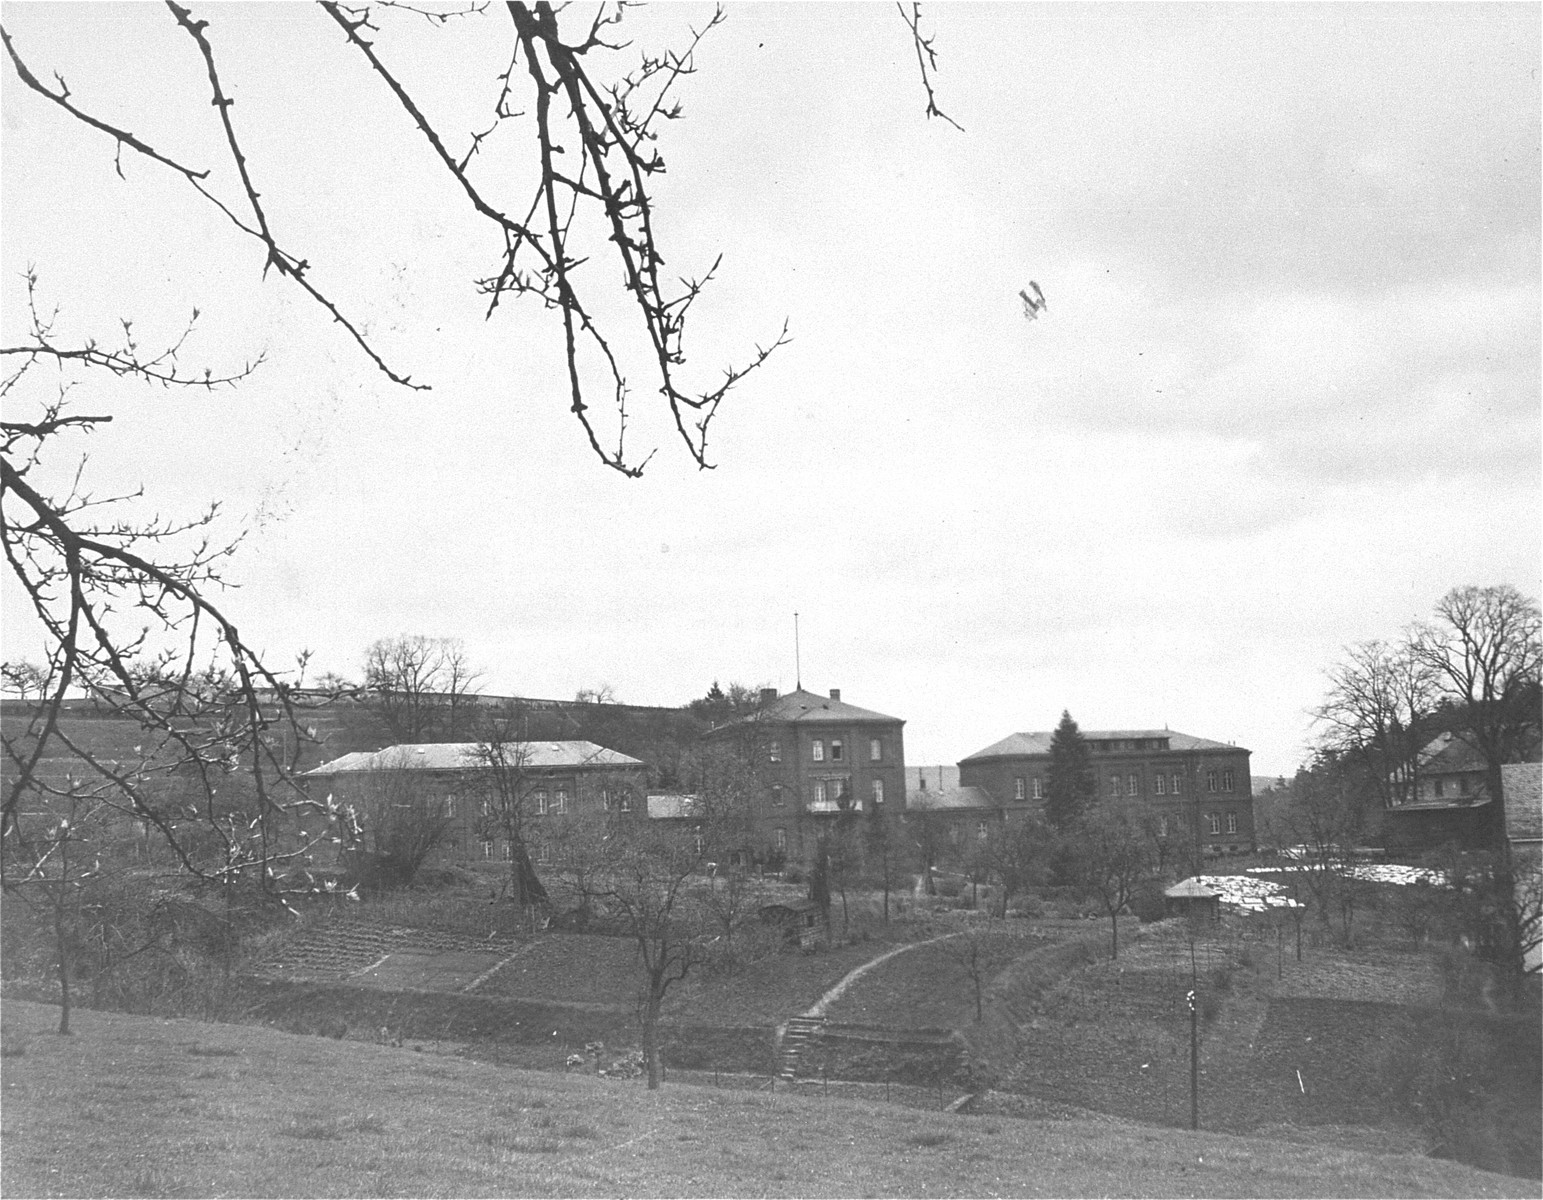 View of the Hadamar Institute.

The photograph was taken by an American military photographer soon after the liberation.